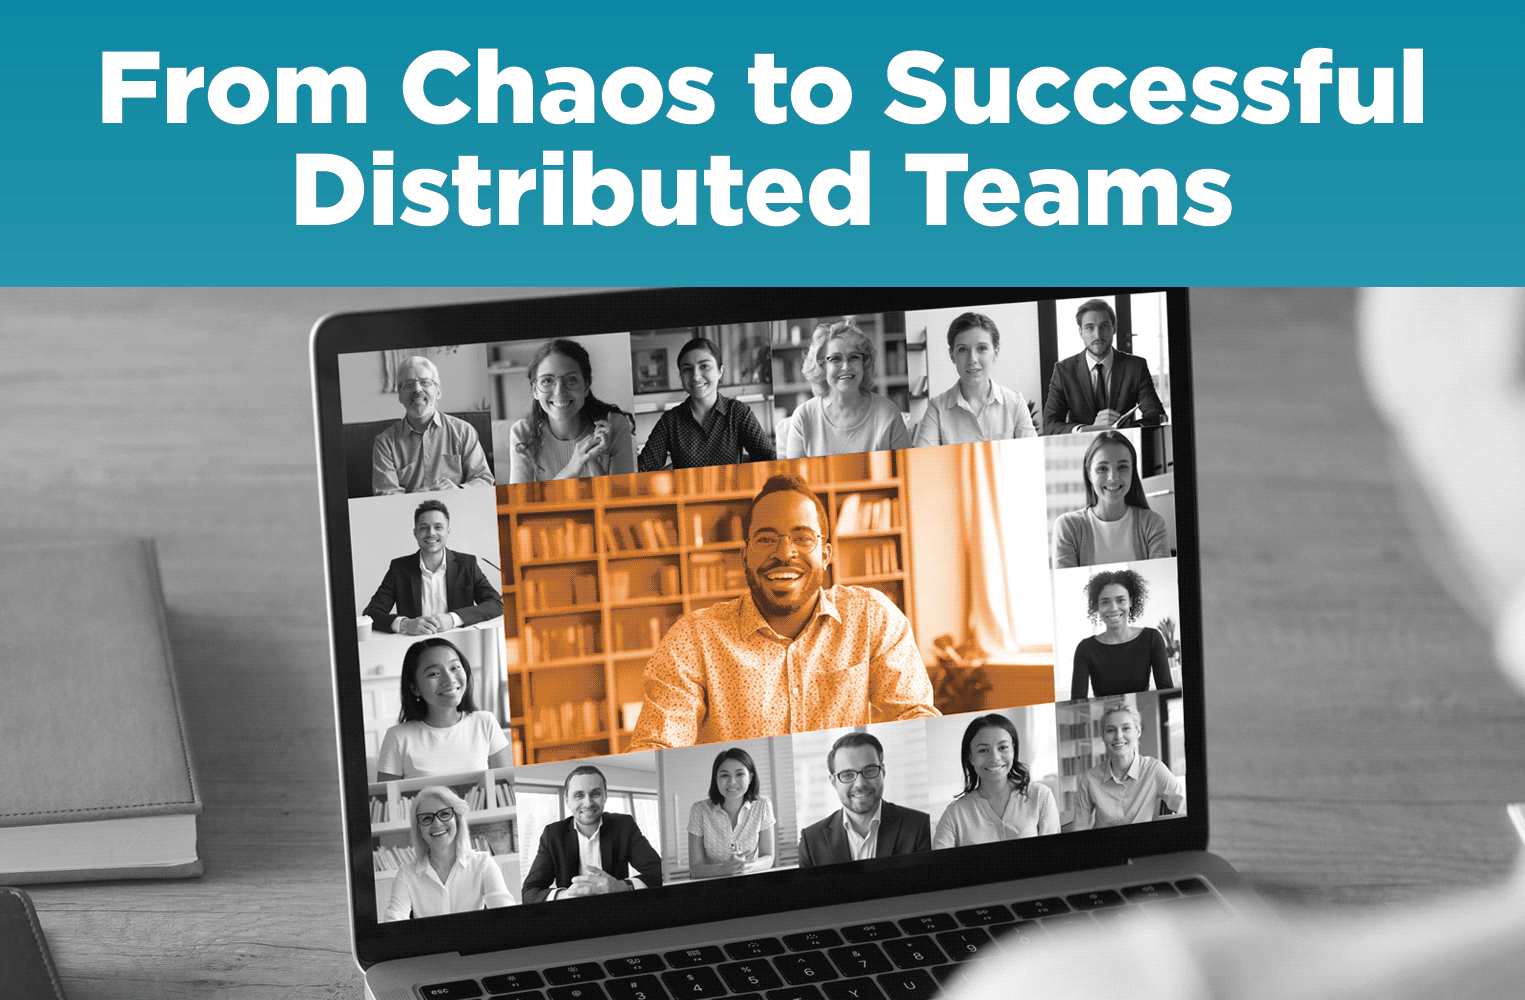 From Chaos to Successful Distributed Teams